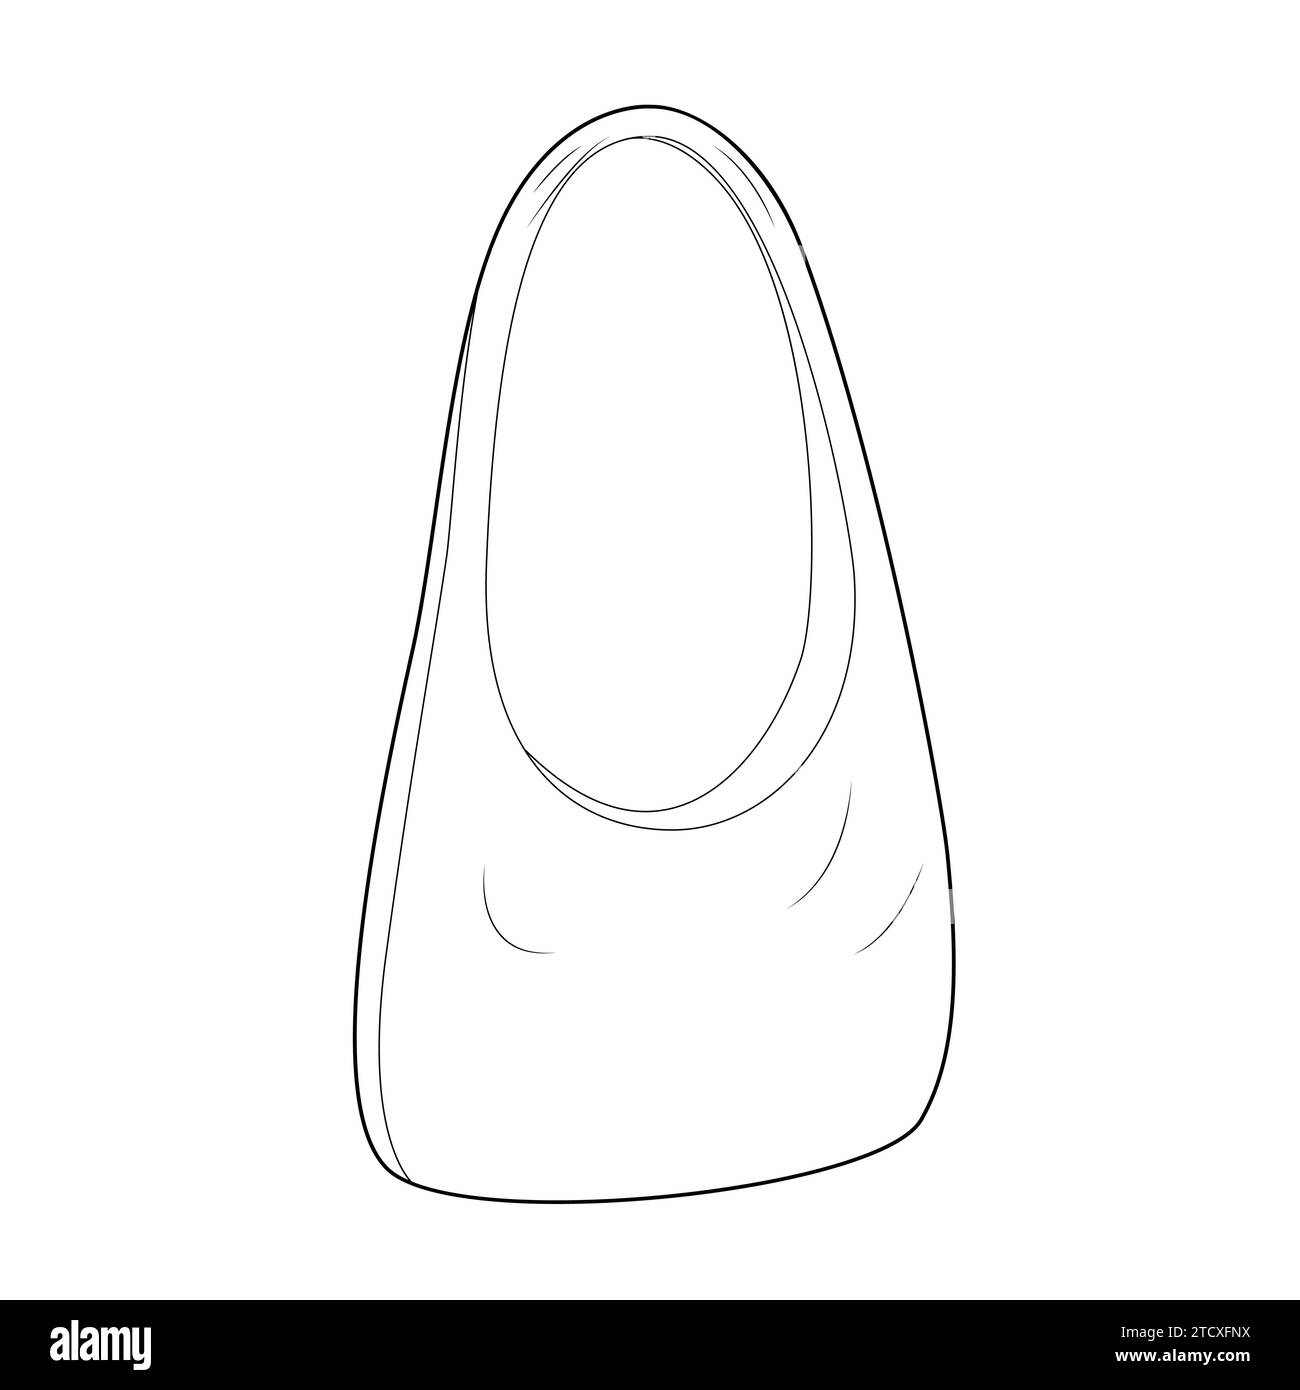 Hobo Cross-Body Bag. Fashion accessory technical illustration. Vector satchel front 3-4 view for Men, women, unisex style, flat handbag CAD mockup sketch outline isolated  Stock Vector